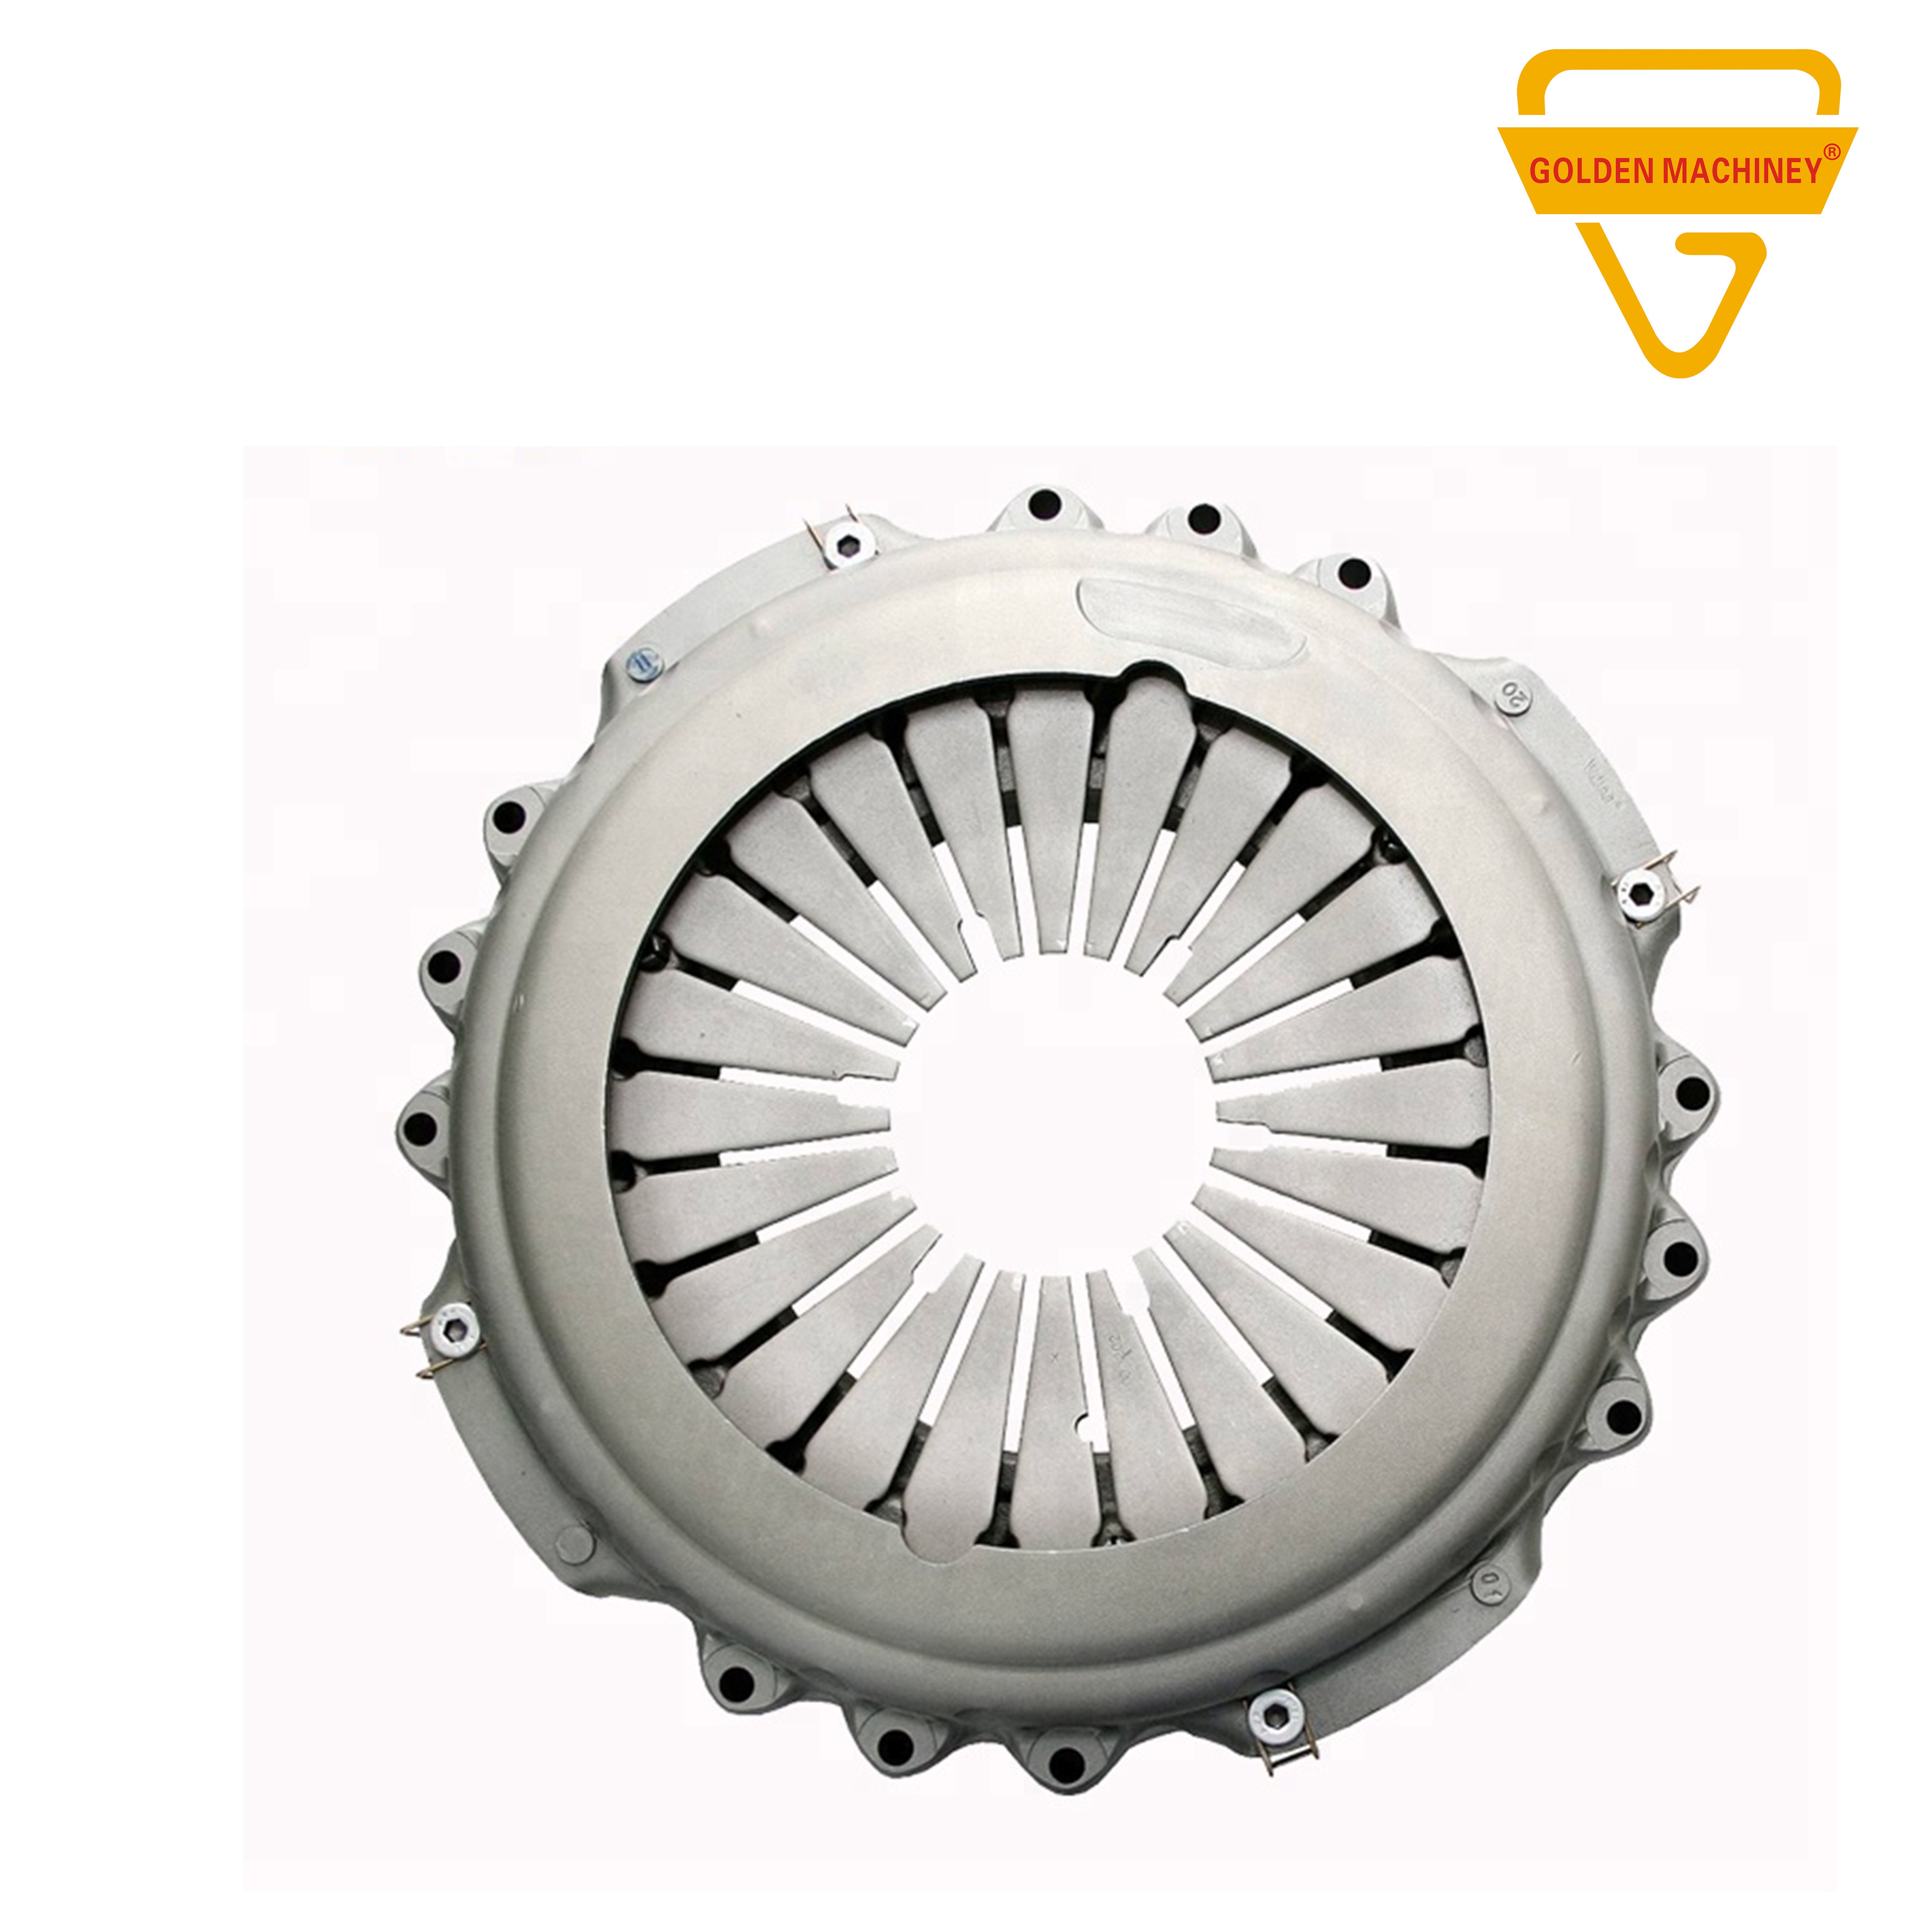 1370794 571217 1113870 SC Truck Parts Cover Assy Clutch for sale